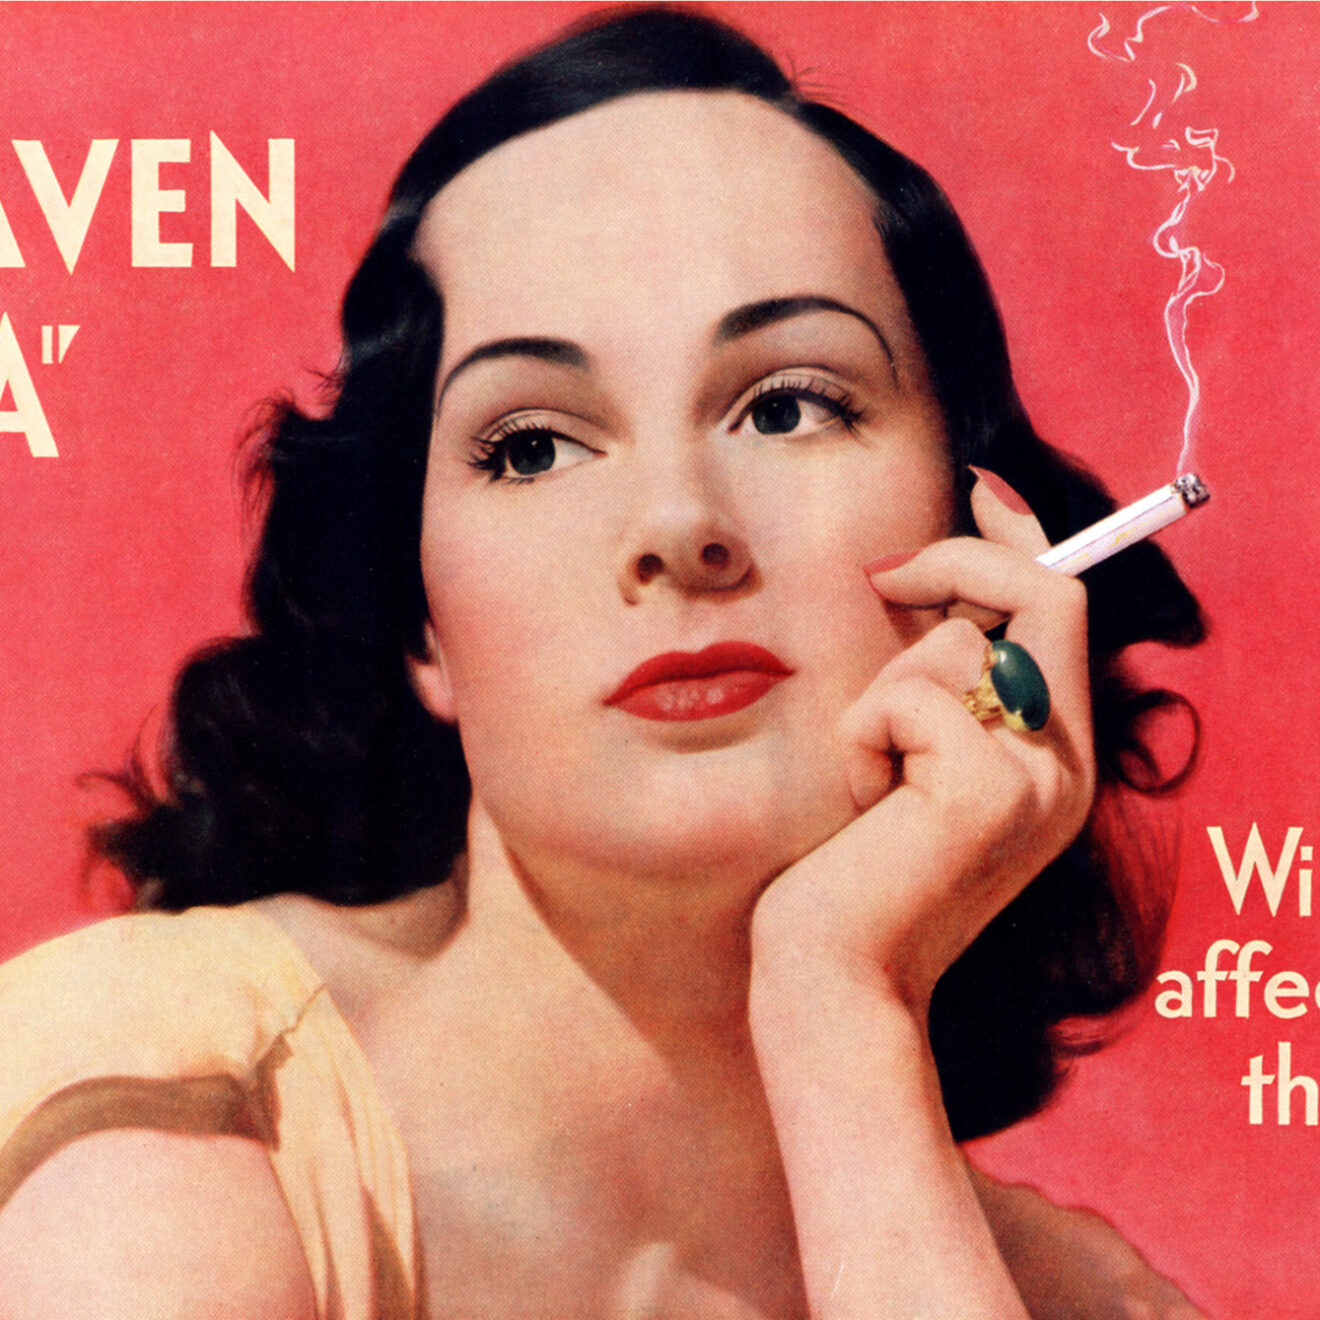 Craven A, « N’affectera pas votre gorge », 1939 | Stanford, Research into the Impact of Tobacco Advertising (SRITA)